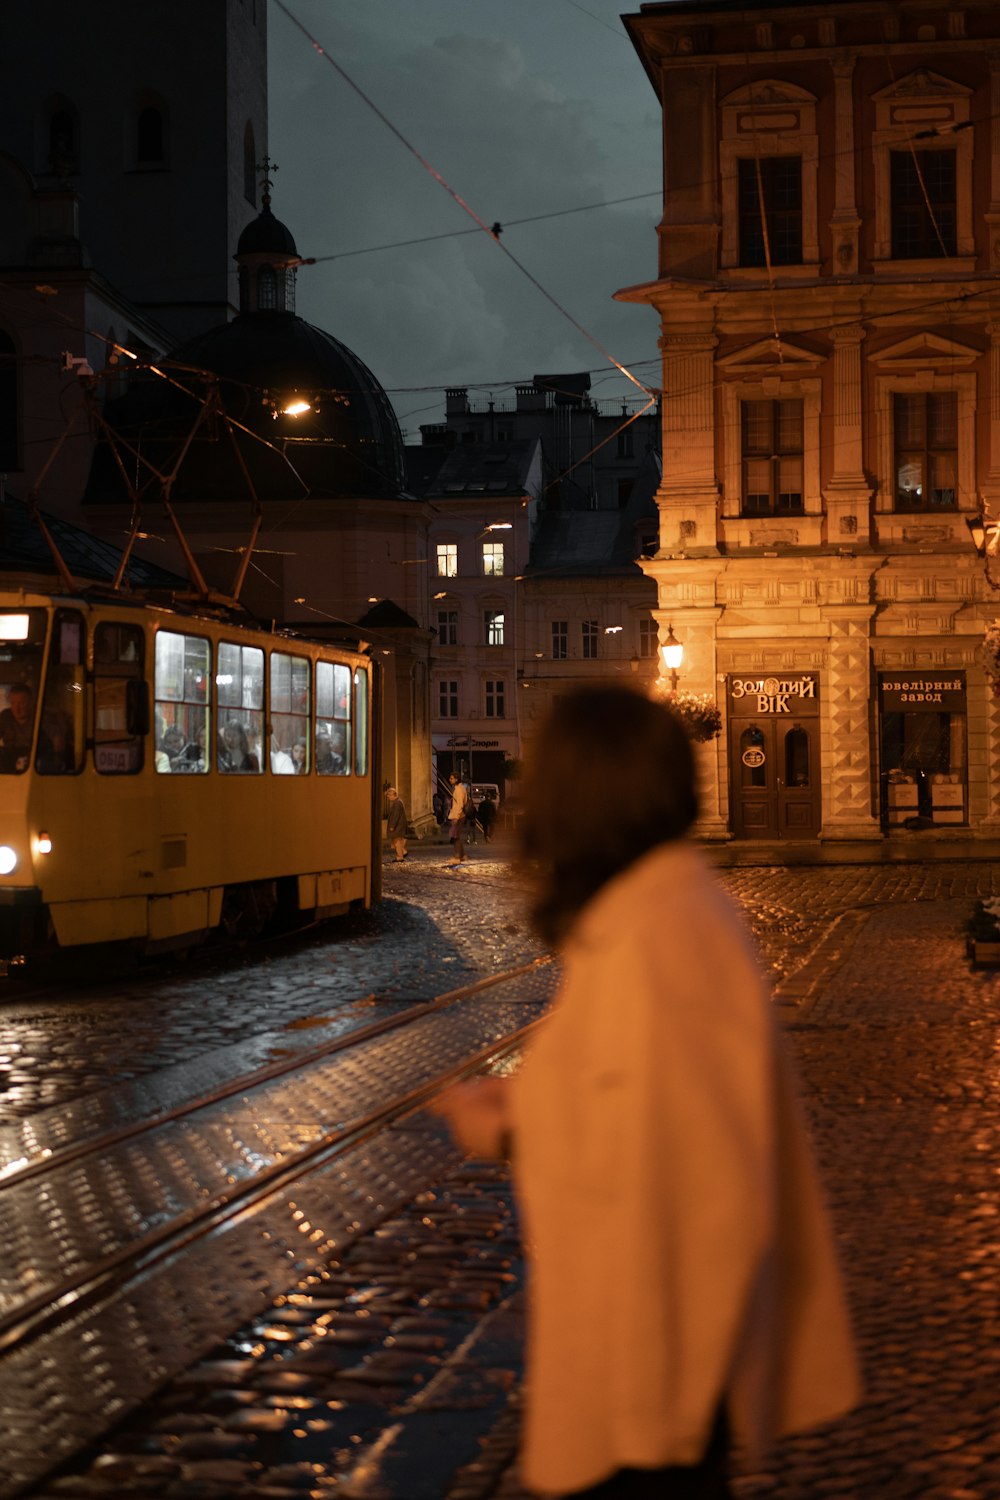 a person walking on a cobblestone street at night